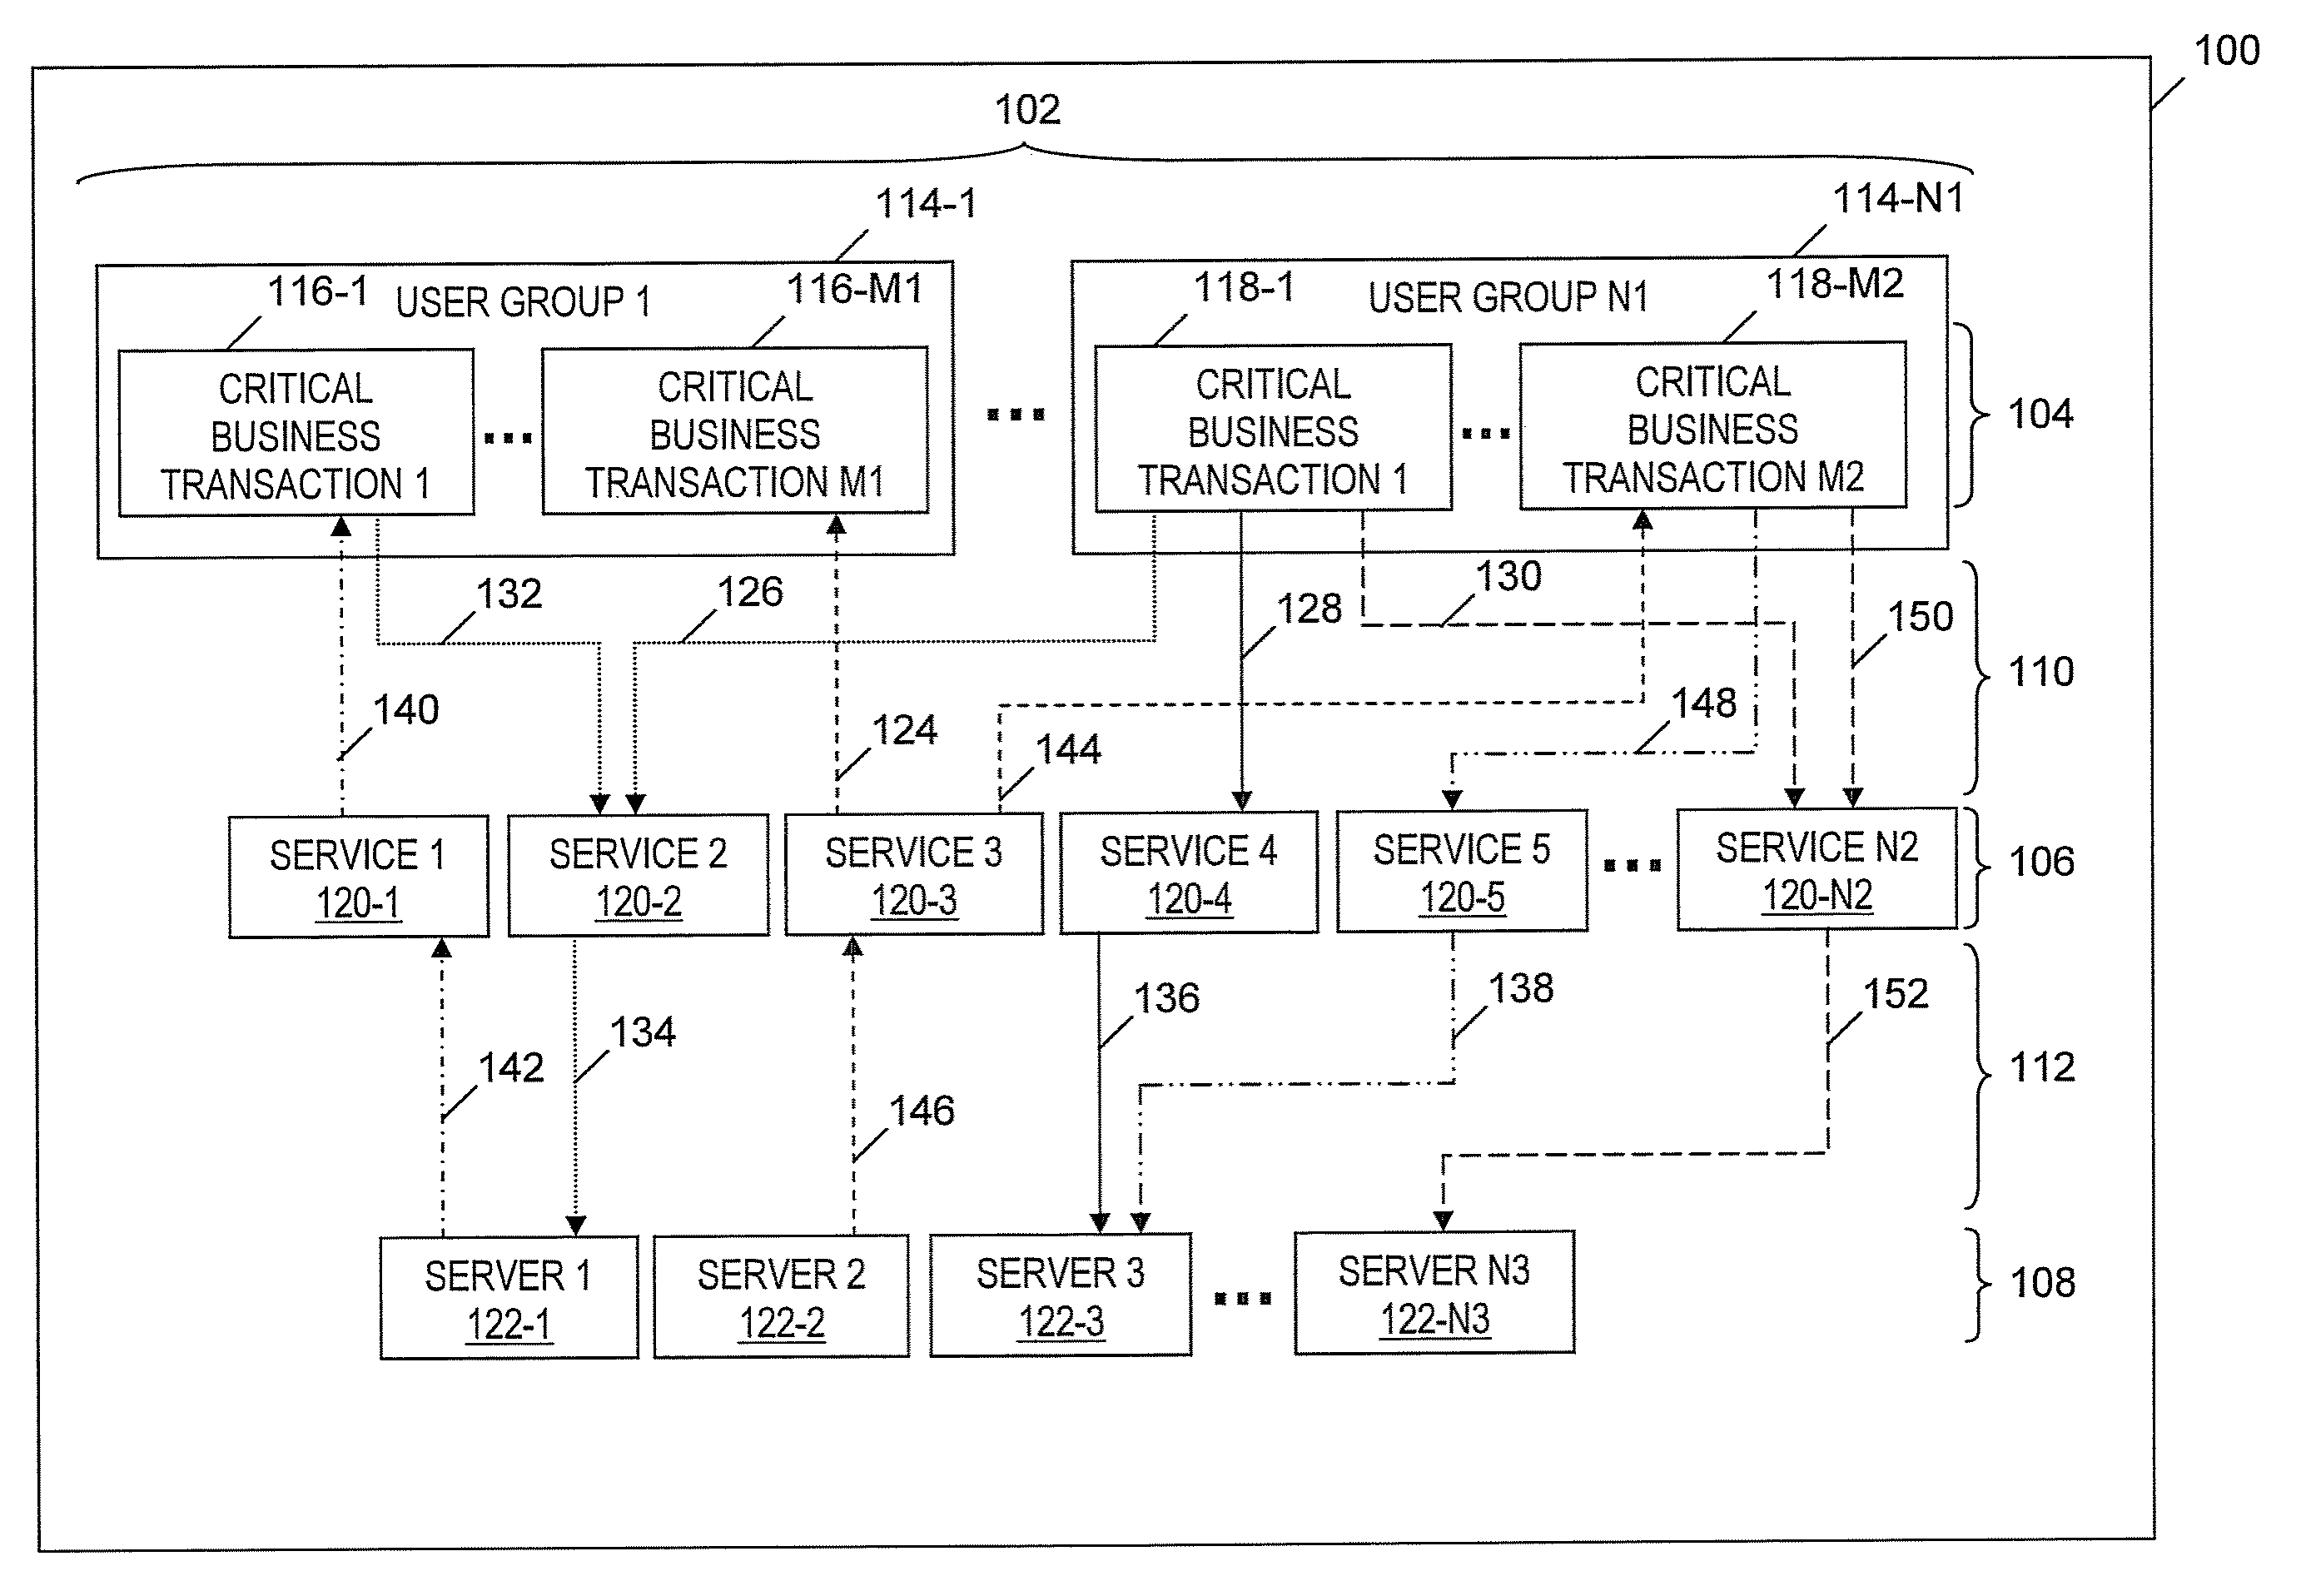 Generating and displaying an application flow diagram that maps business transactions for application performance engineering